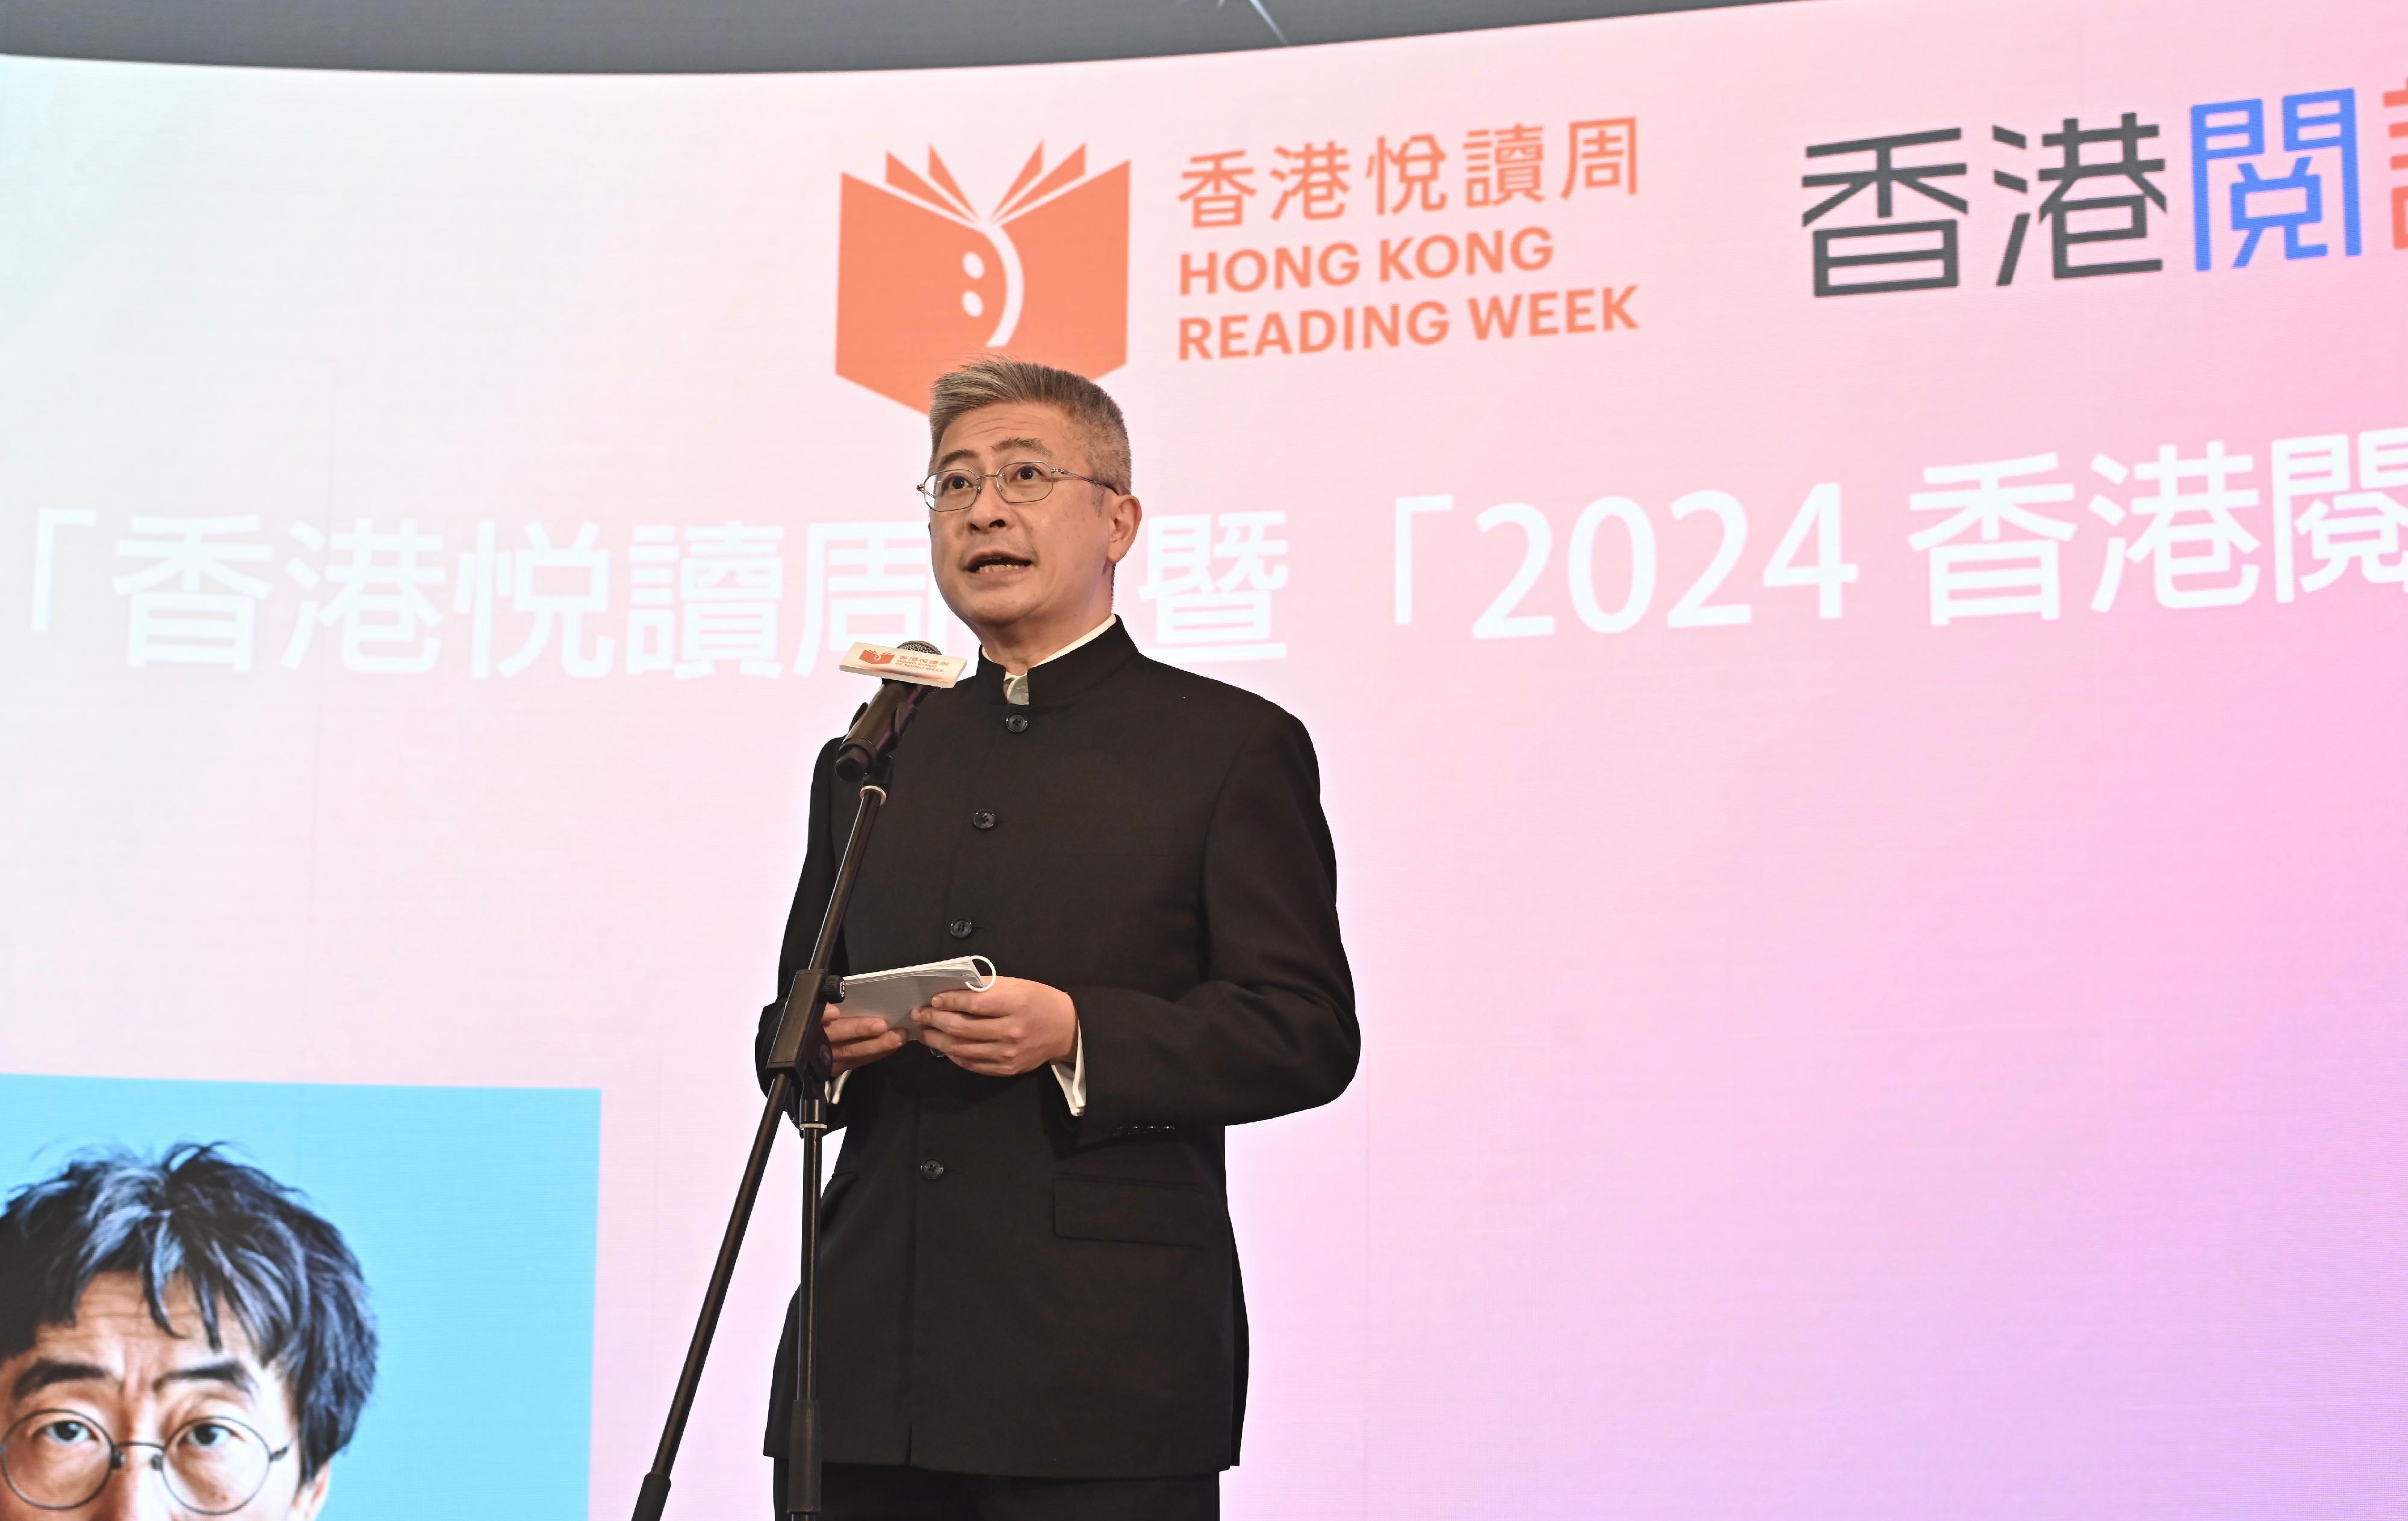 The Hong Kong Public Libraries of the Leisure and Cultural Services Department and the Hong Kong Publishing Federation today (April 20) jointly held the opening ceremony of Hong Kong Reading Week and the 2024 Hong Kong Reading+ at New Town Plaza in Sha Tin. Photo shows the Acting Secretary for Culture, Sports and Tourism, Mr Raistlin Lau, delivering a speech at the opening ceremony.
